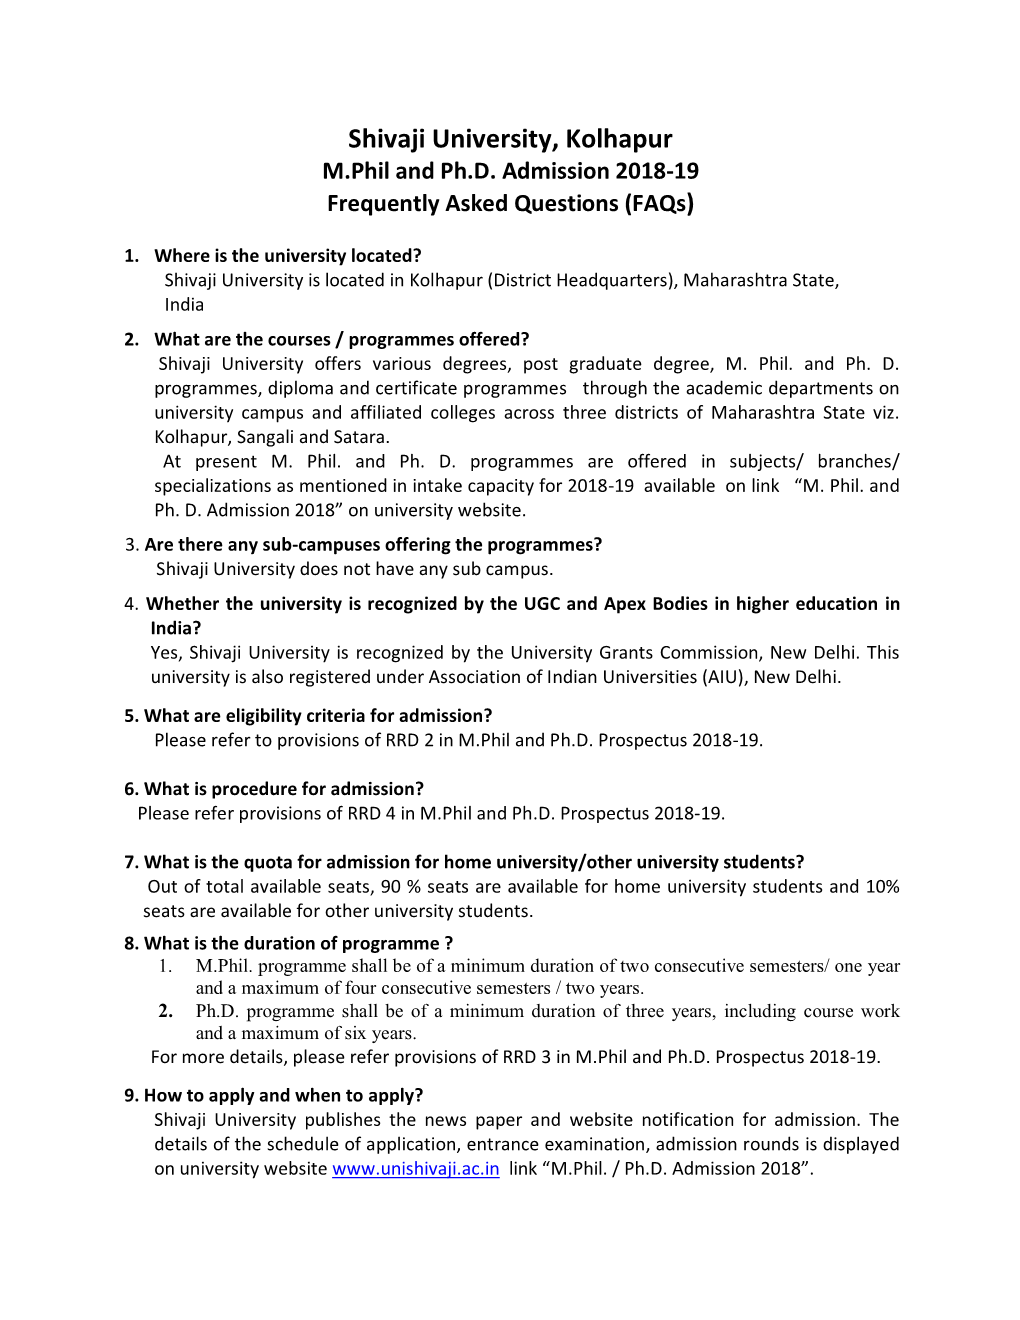 M.Phil and Ph.D. Admission 2018-19 Frequently Asked Questions (Faqs)